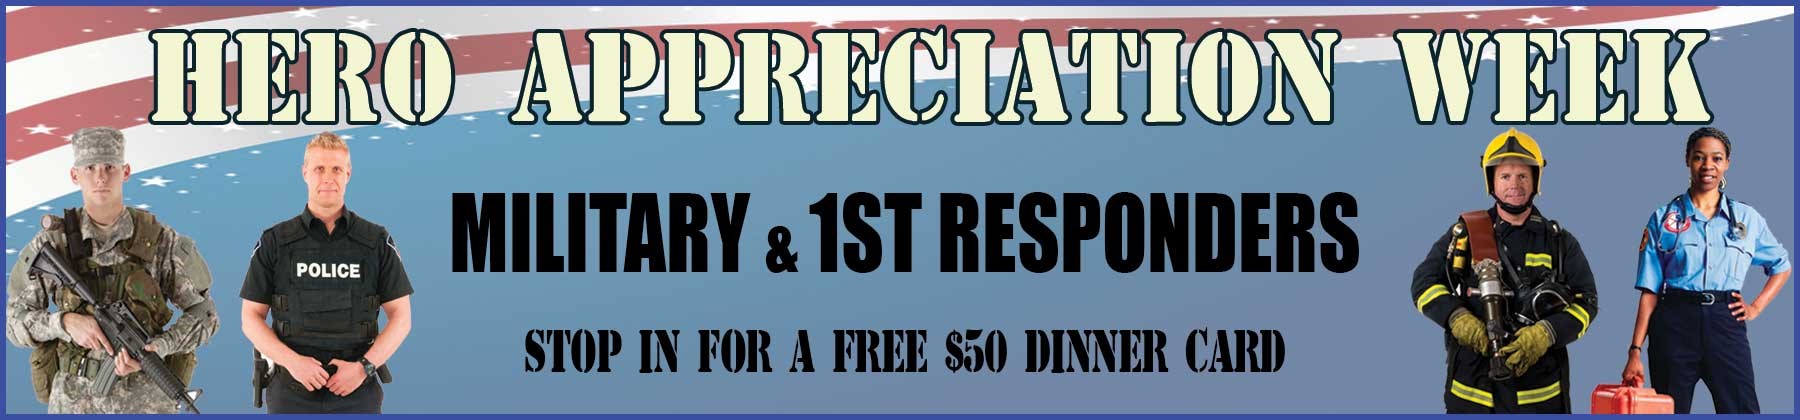 Free $50 dinner for military & first responders